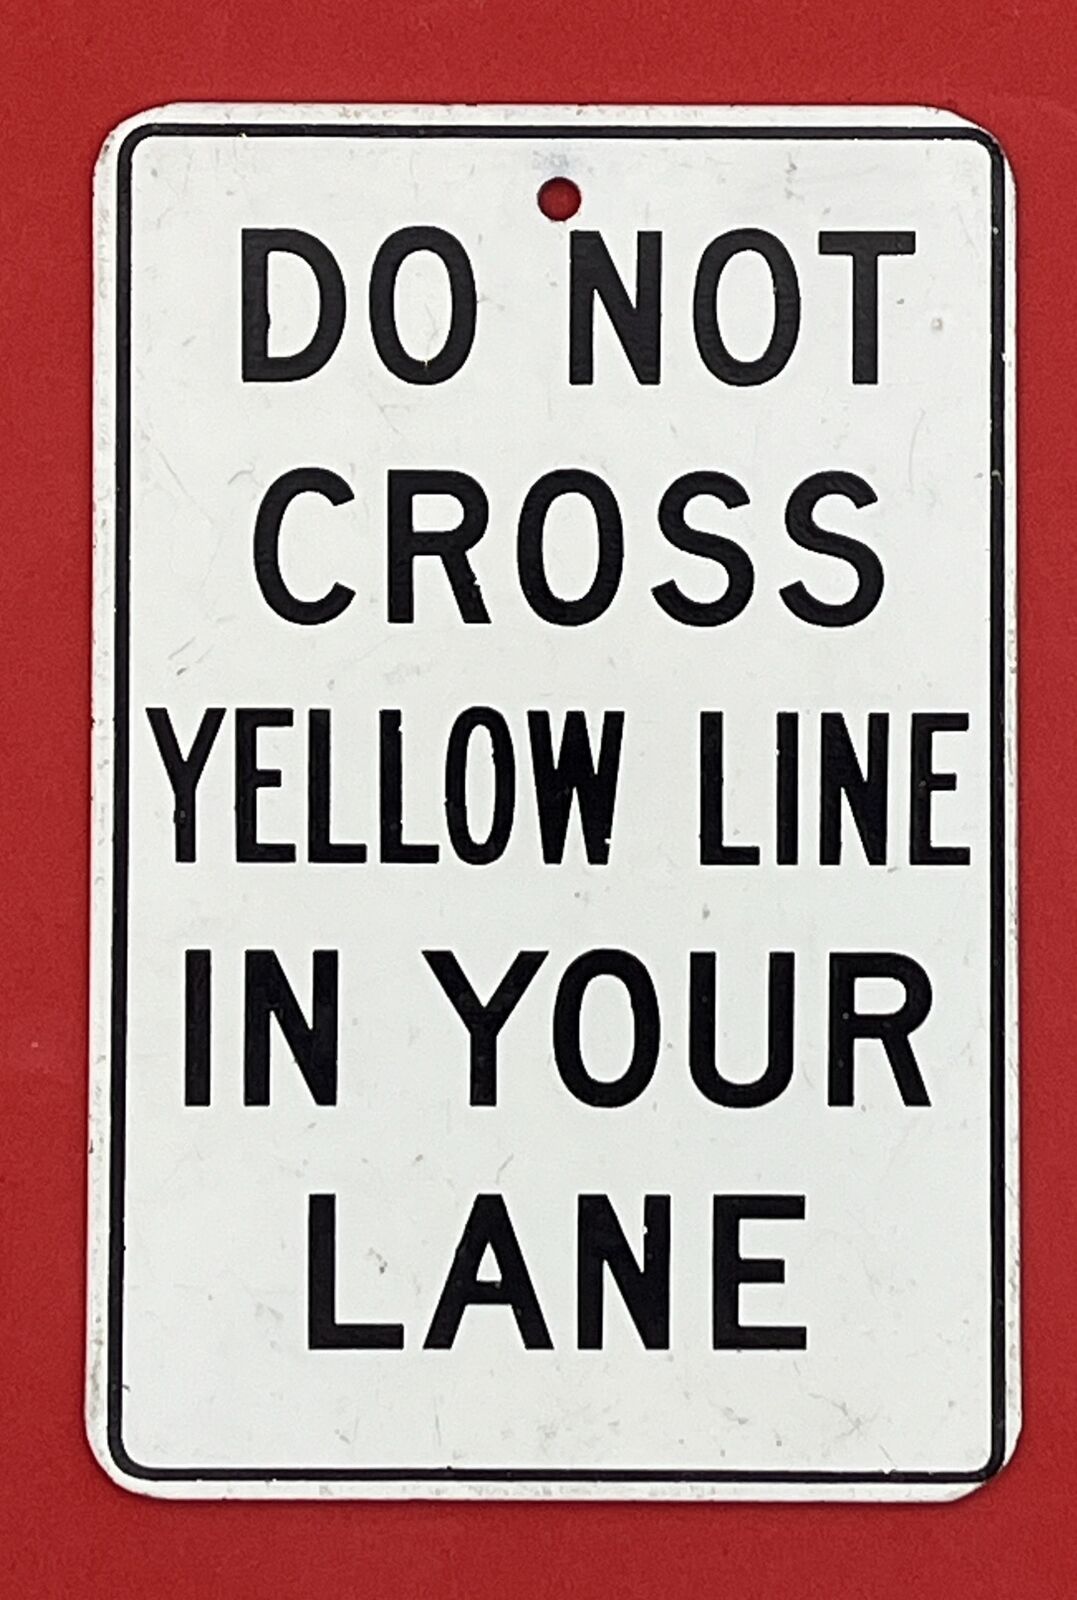 Do Not Cross Yellow Line In Your Lane Small Metal Sign